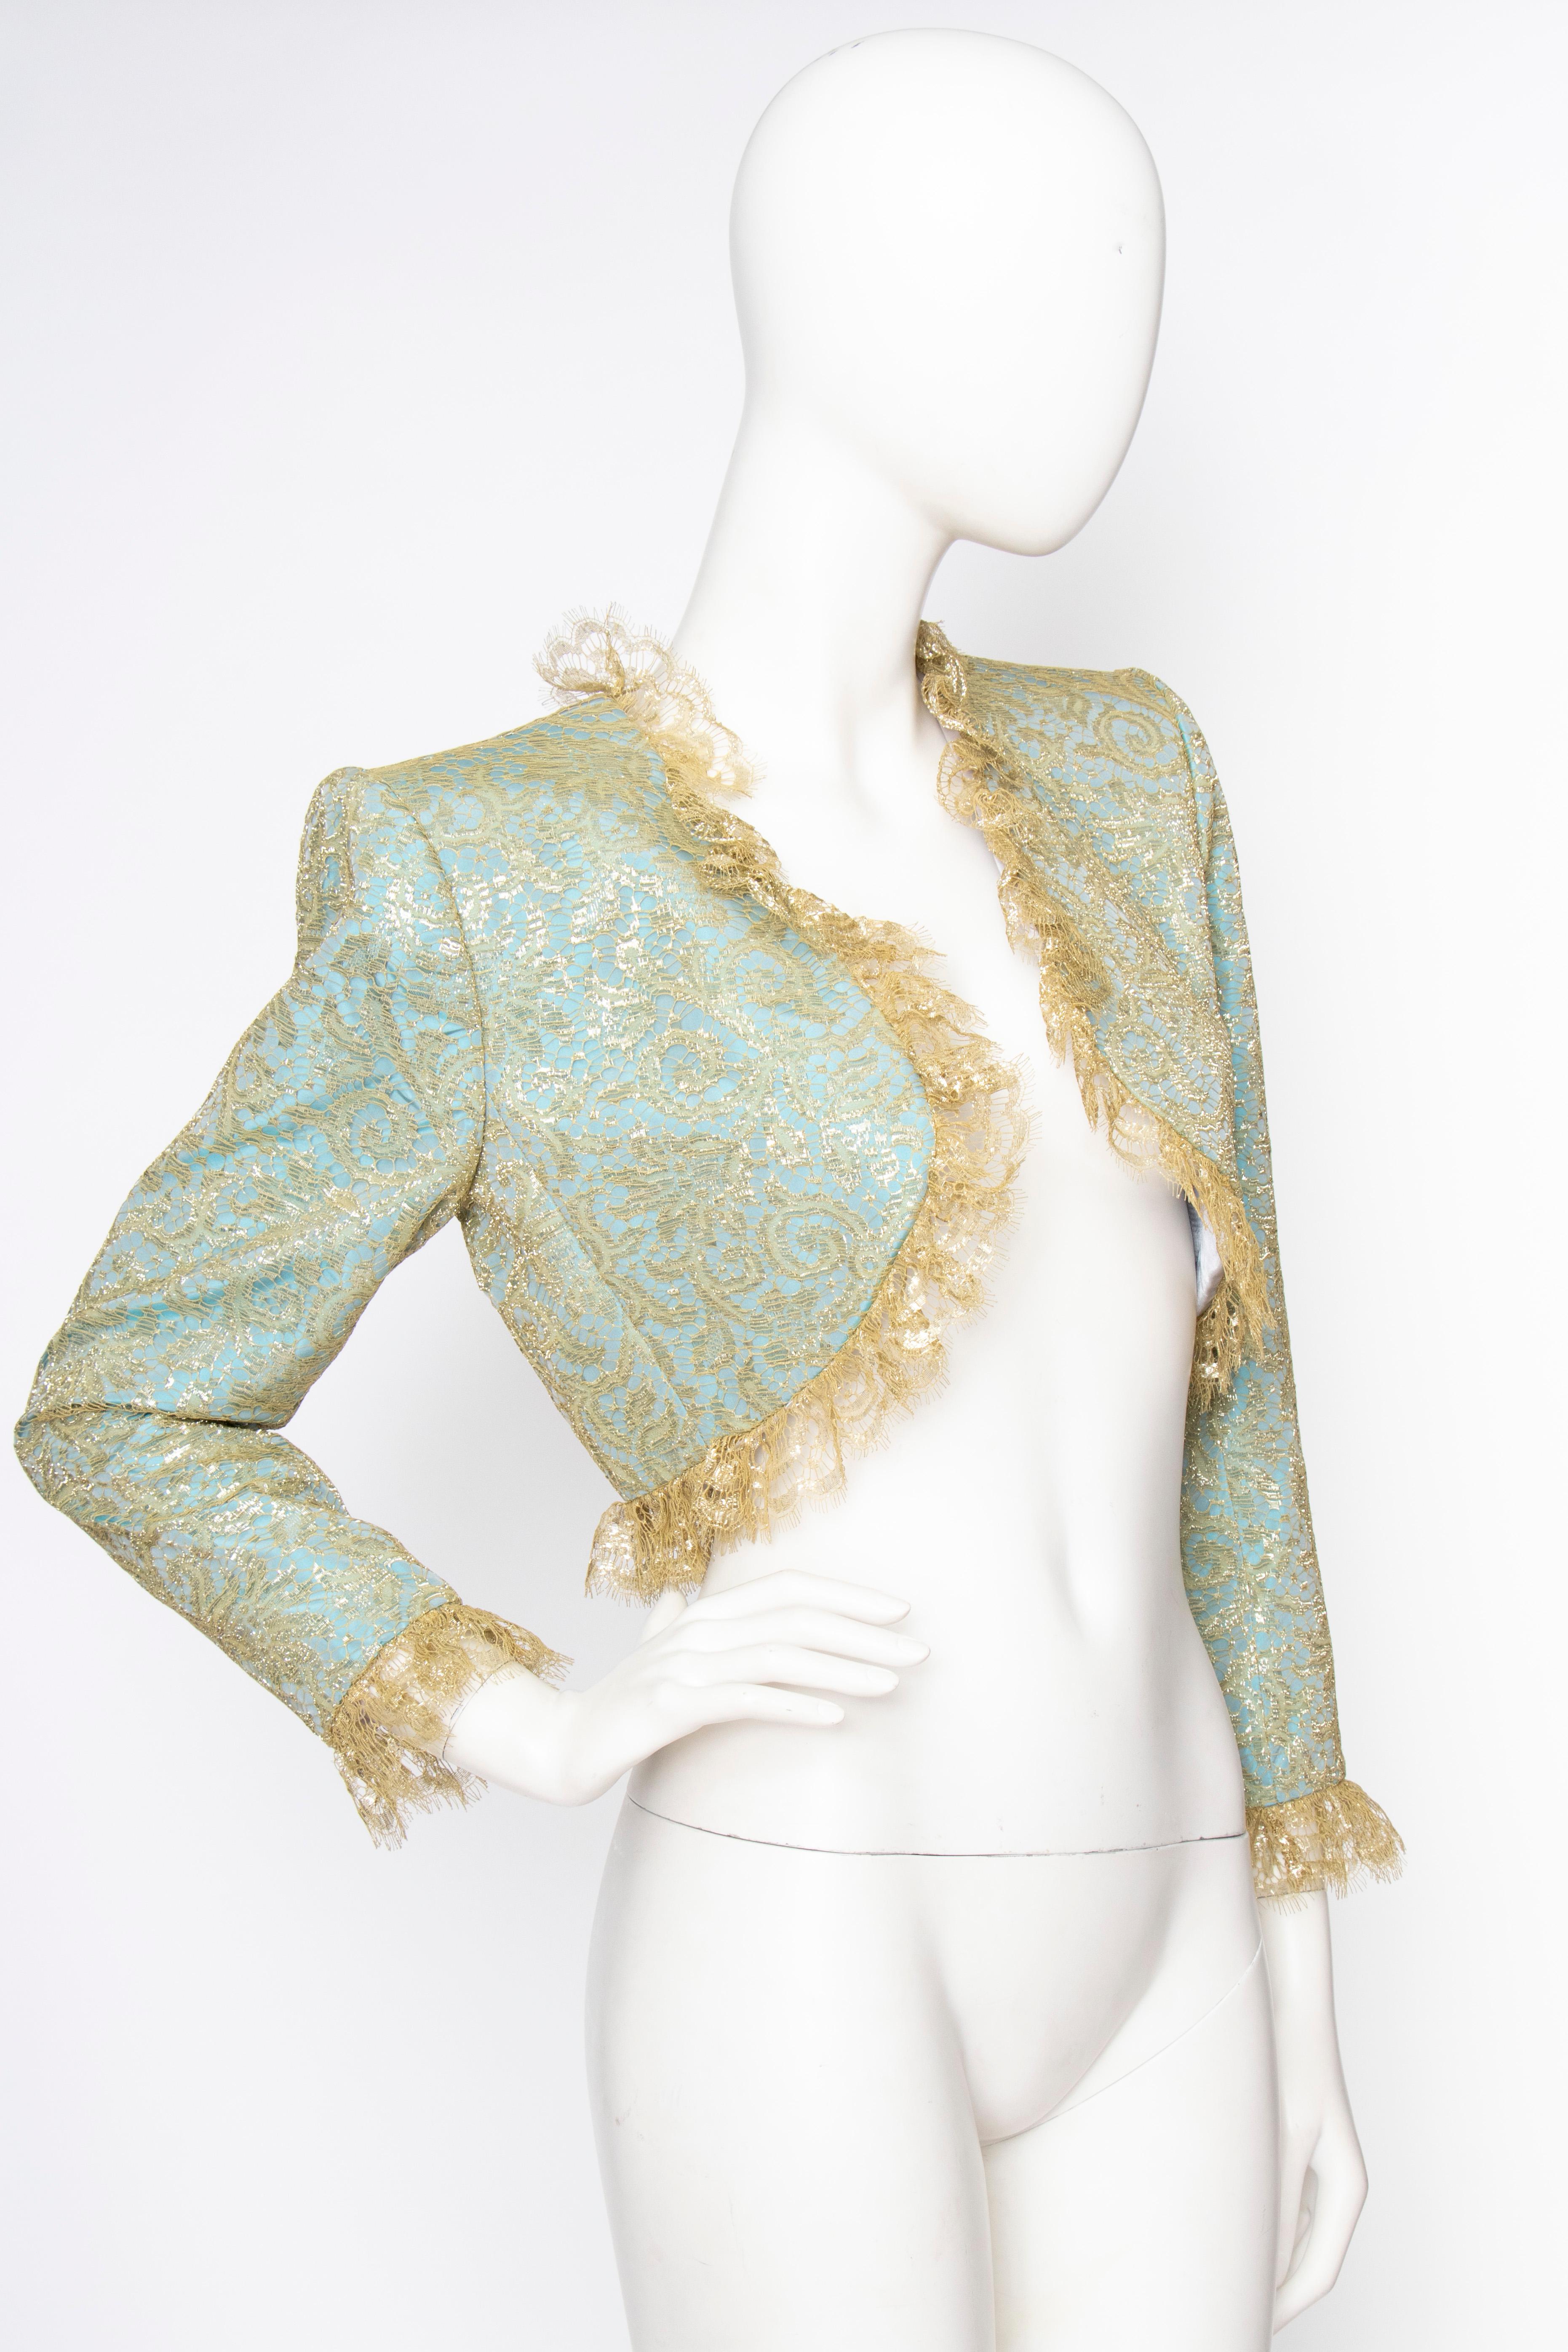 A glamorous 1980s Yves Saint Laurent Rive Gauche turquoise bolero jacket with fabulous shoulders, gold lace overlay and gold ruffle trim around the neck, open-front and cuffs. The jacket is fully lined. 

The size of the item corresponds to a modern